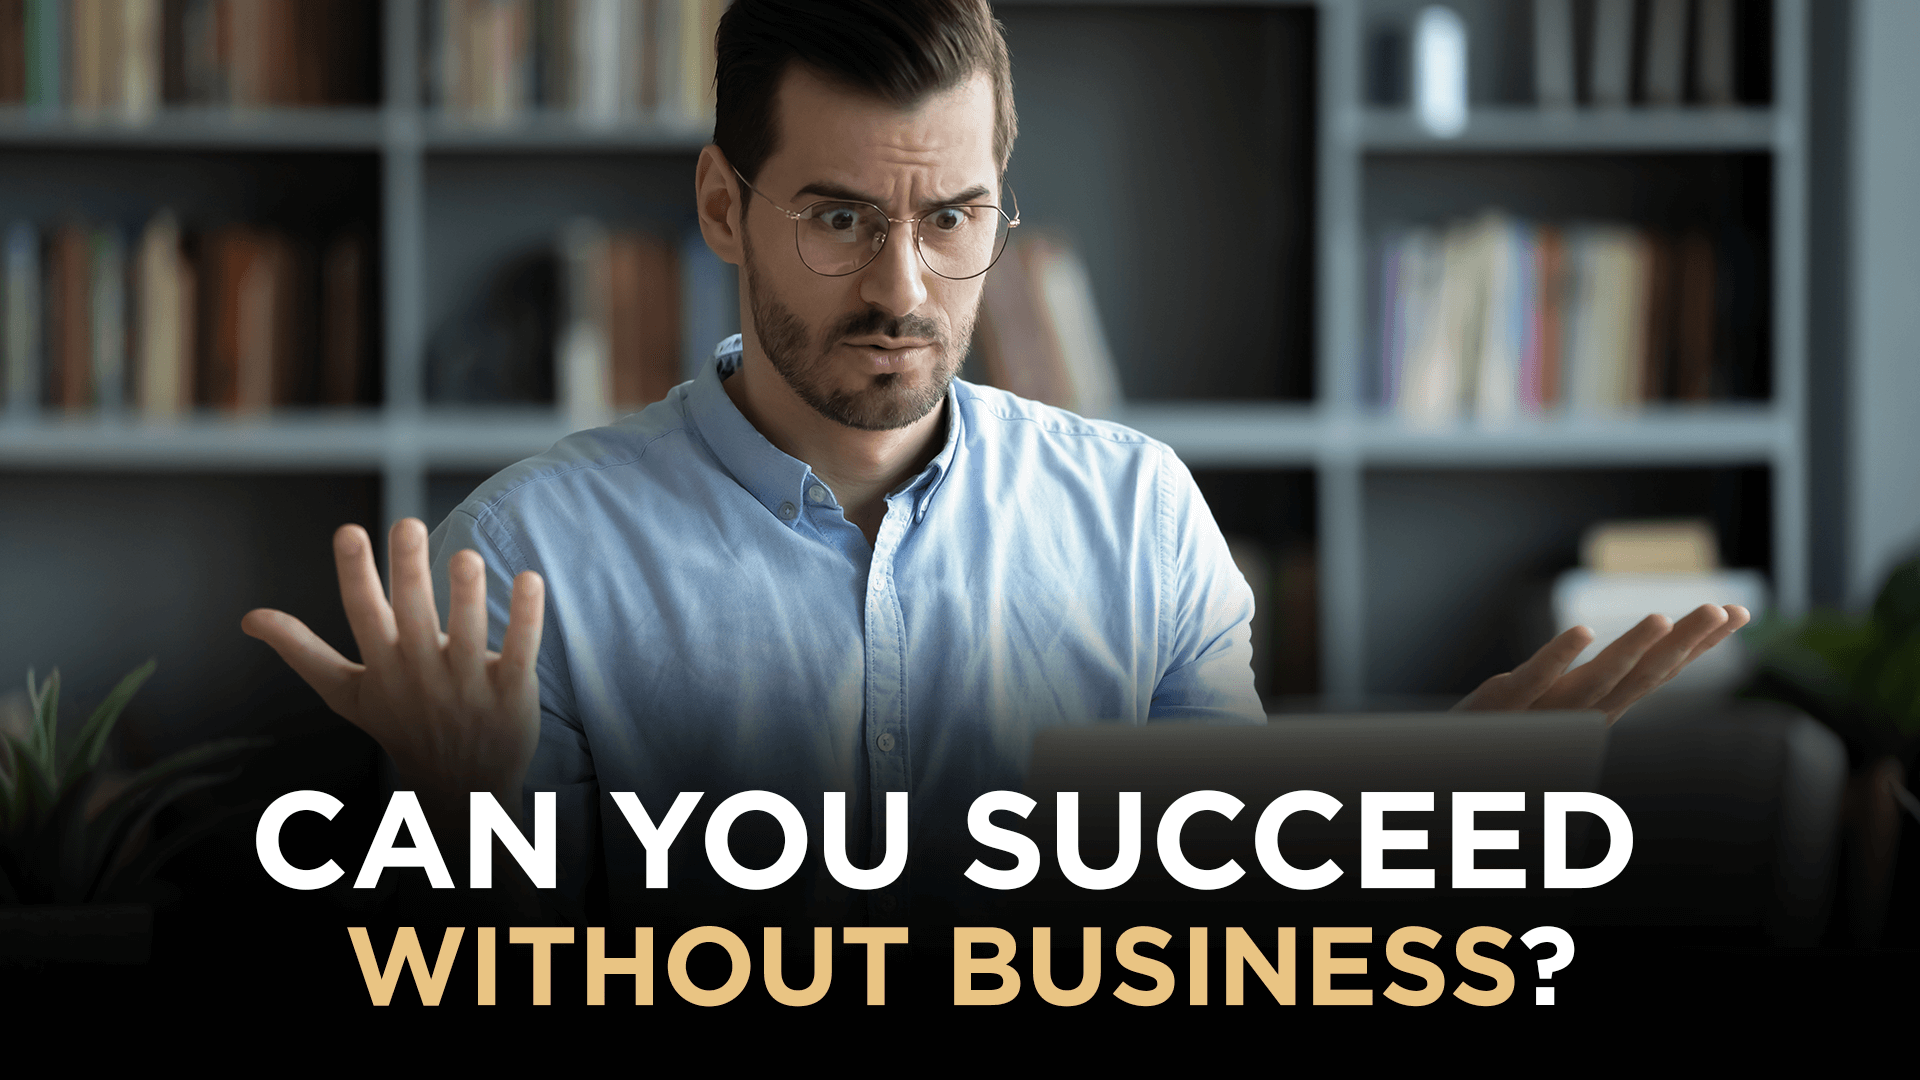 Can you succeed without business